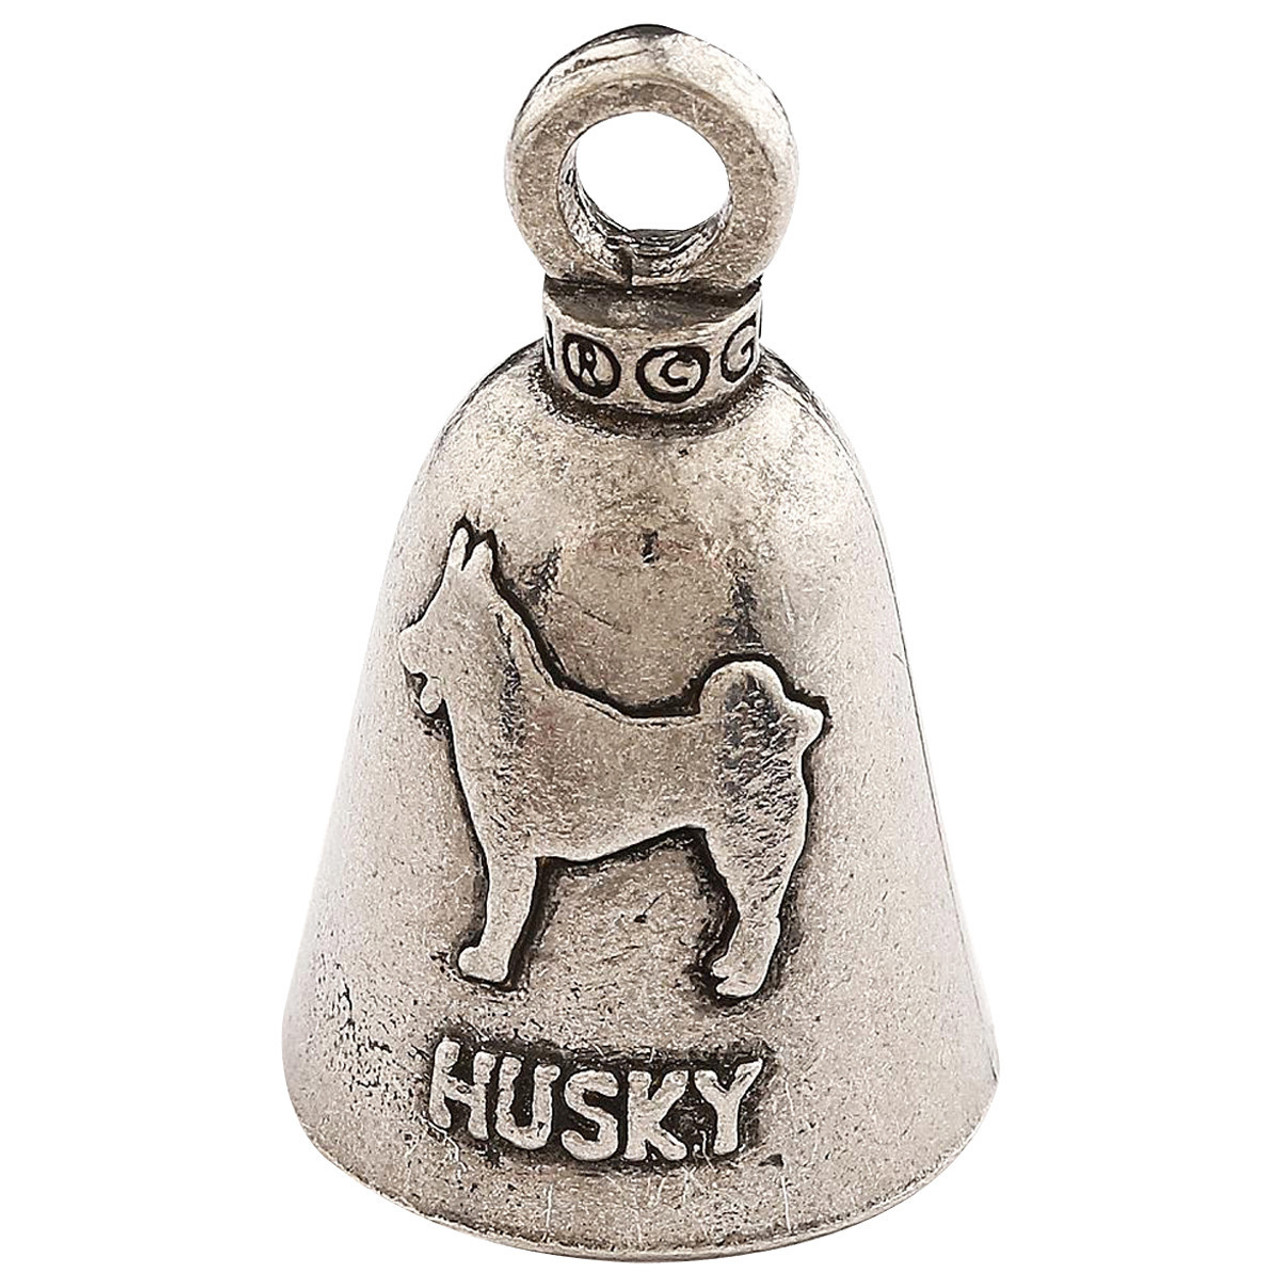 Guardian Bell Dog Good Luck Bell w/Keyring & Black Velvet Gift Bag |  Motorcycle Bell | Lead-Free Pewter | Made in USA